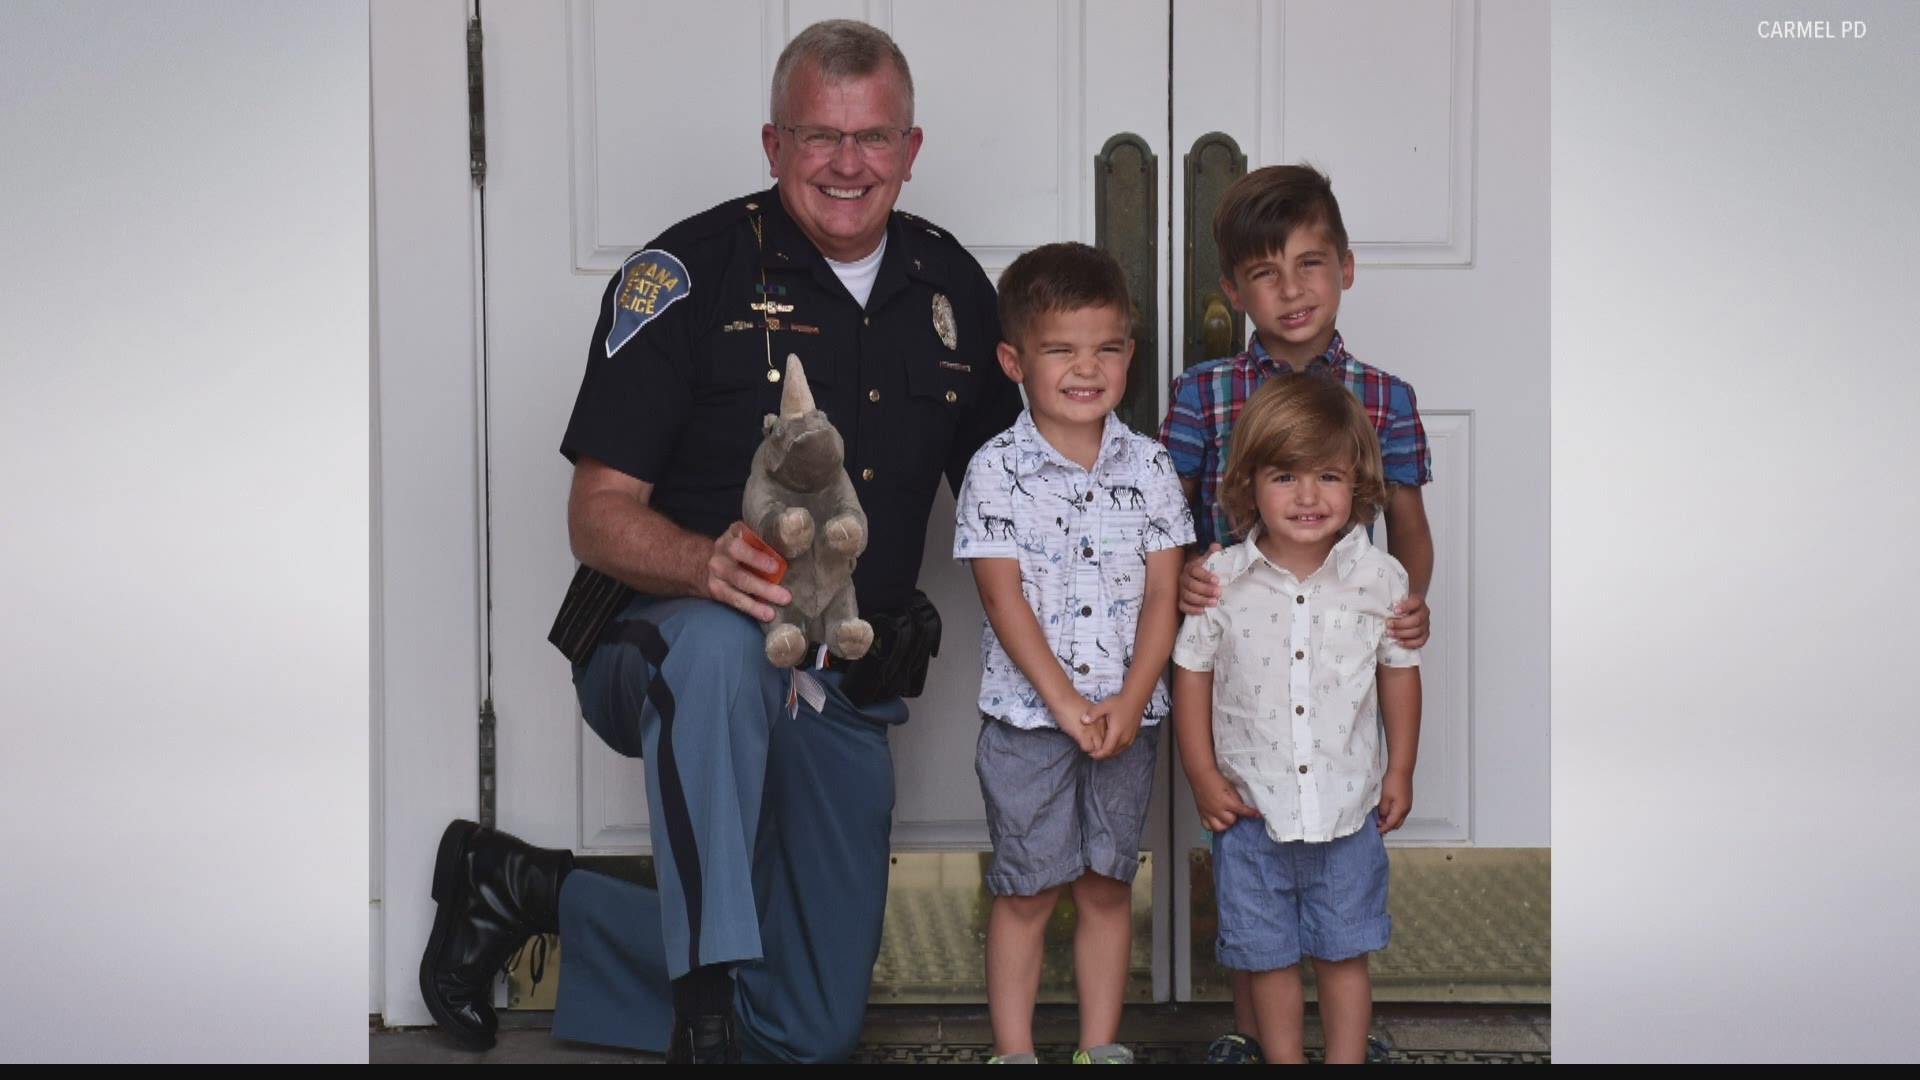 A 4-year-old Carmel boy is hoping to recognize and help law enforcement officers by giving them a stuffed rhino.